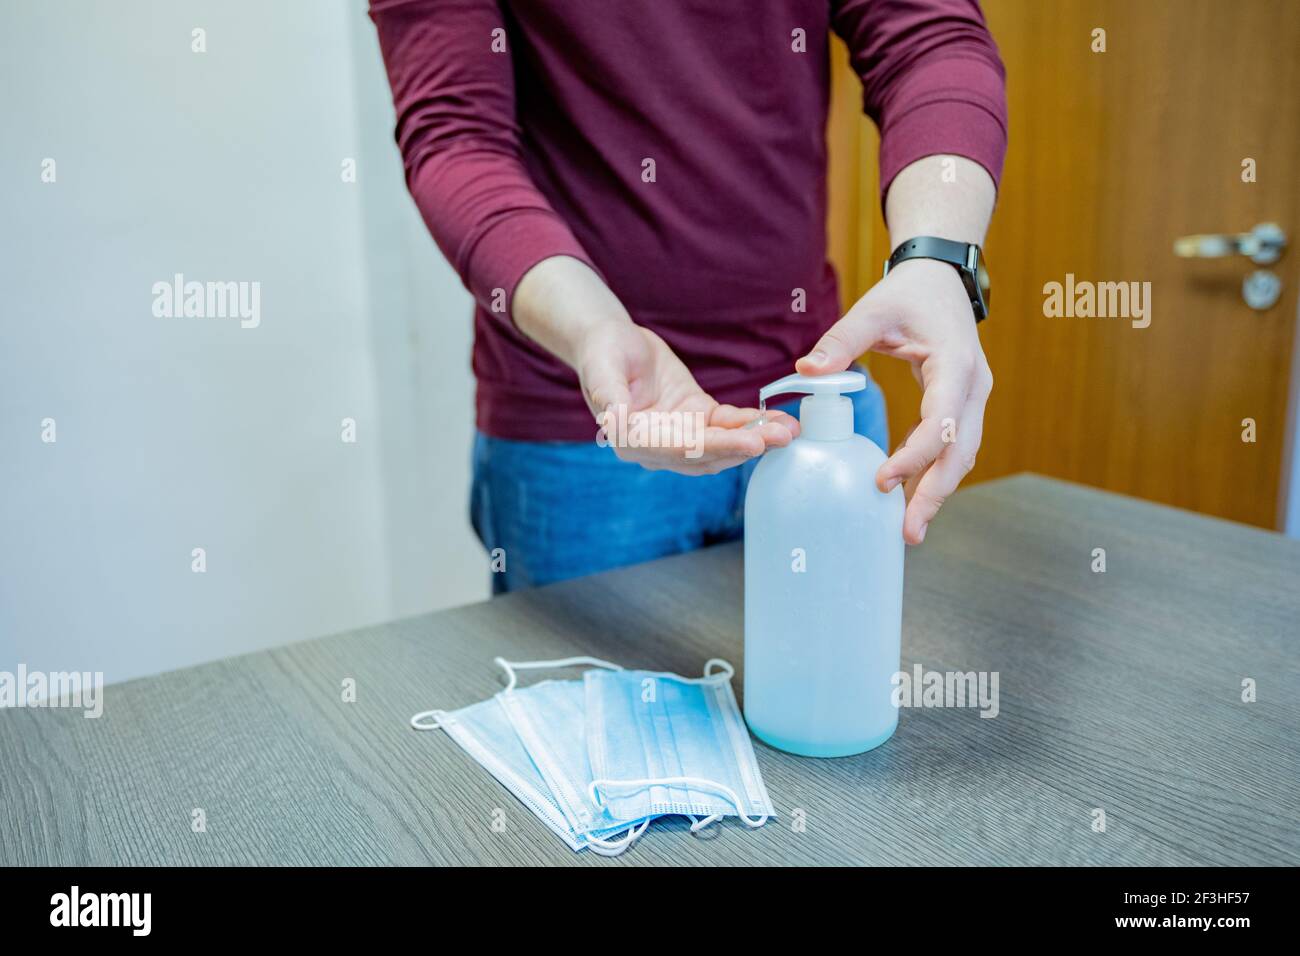 Man cleaning laptop and tablet with white wipe Stock Photo